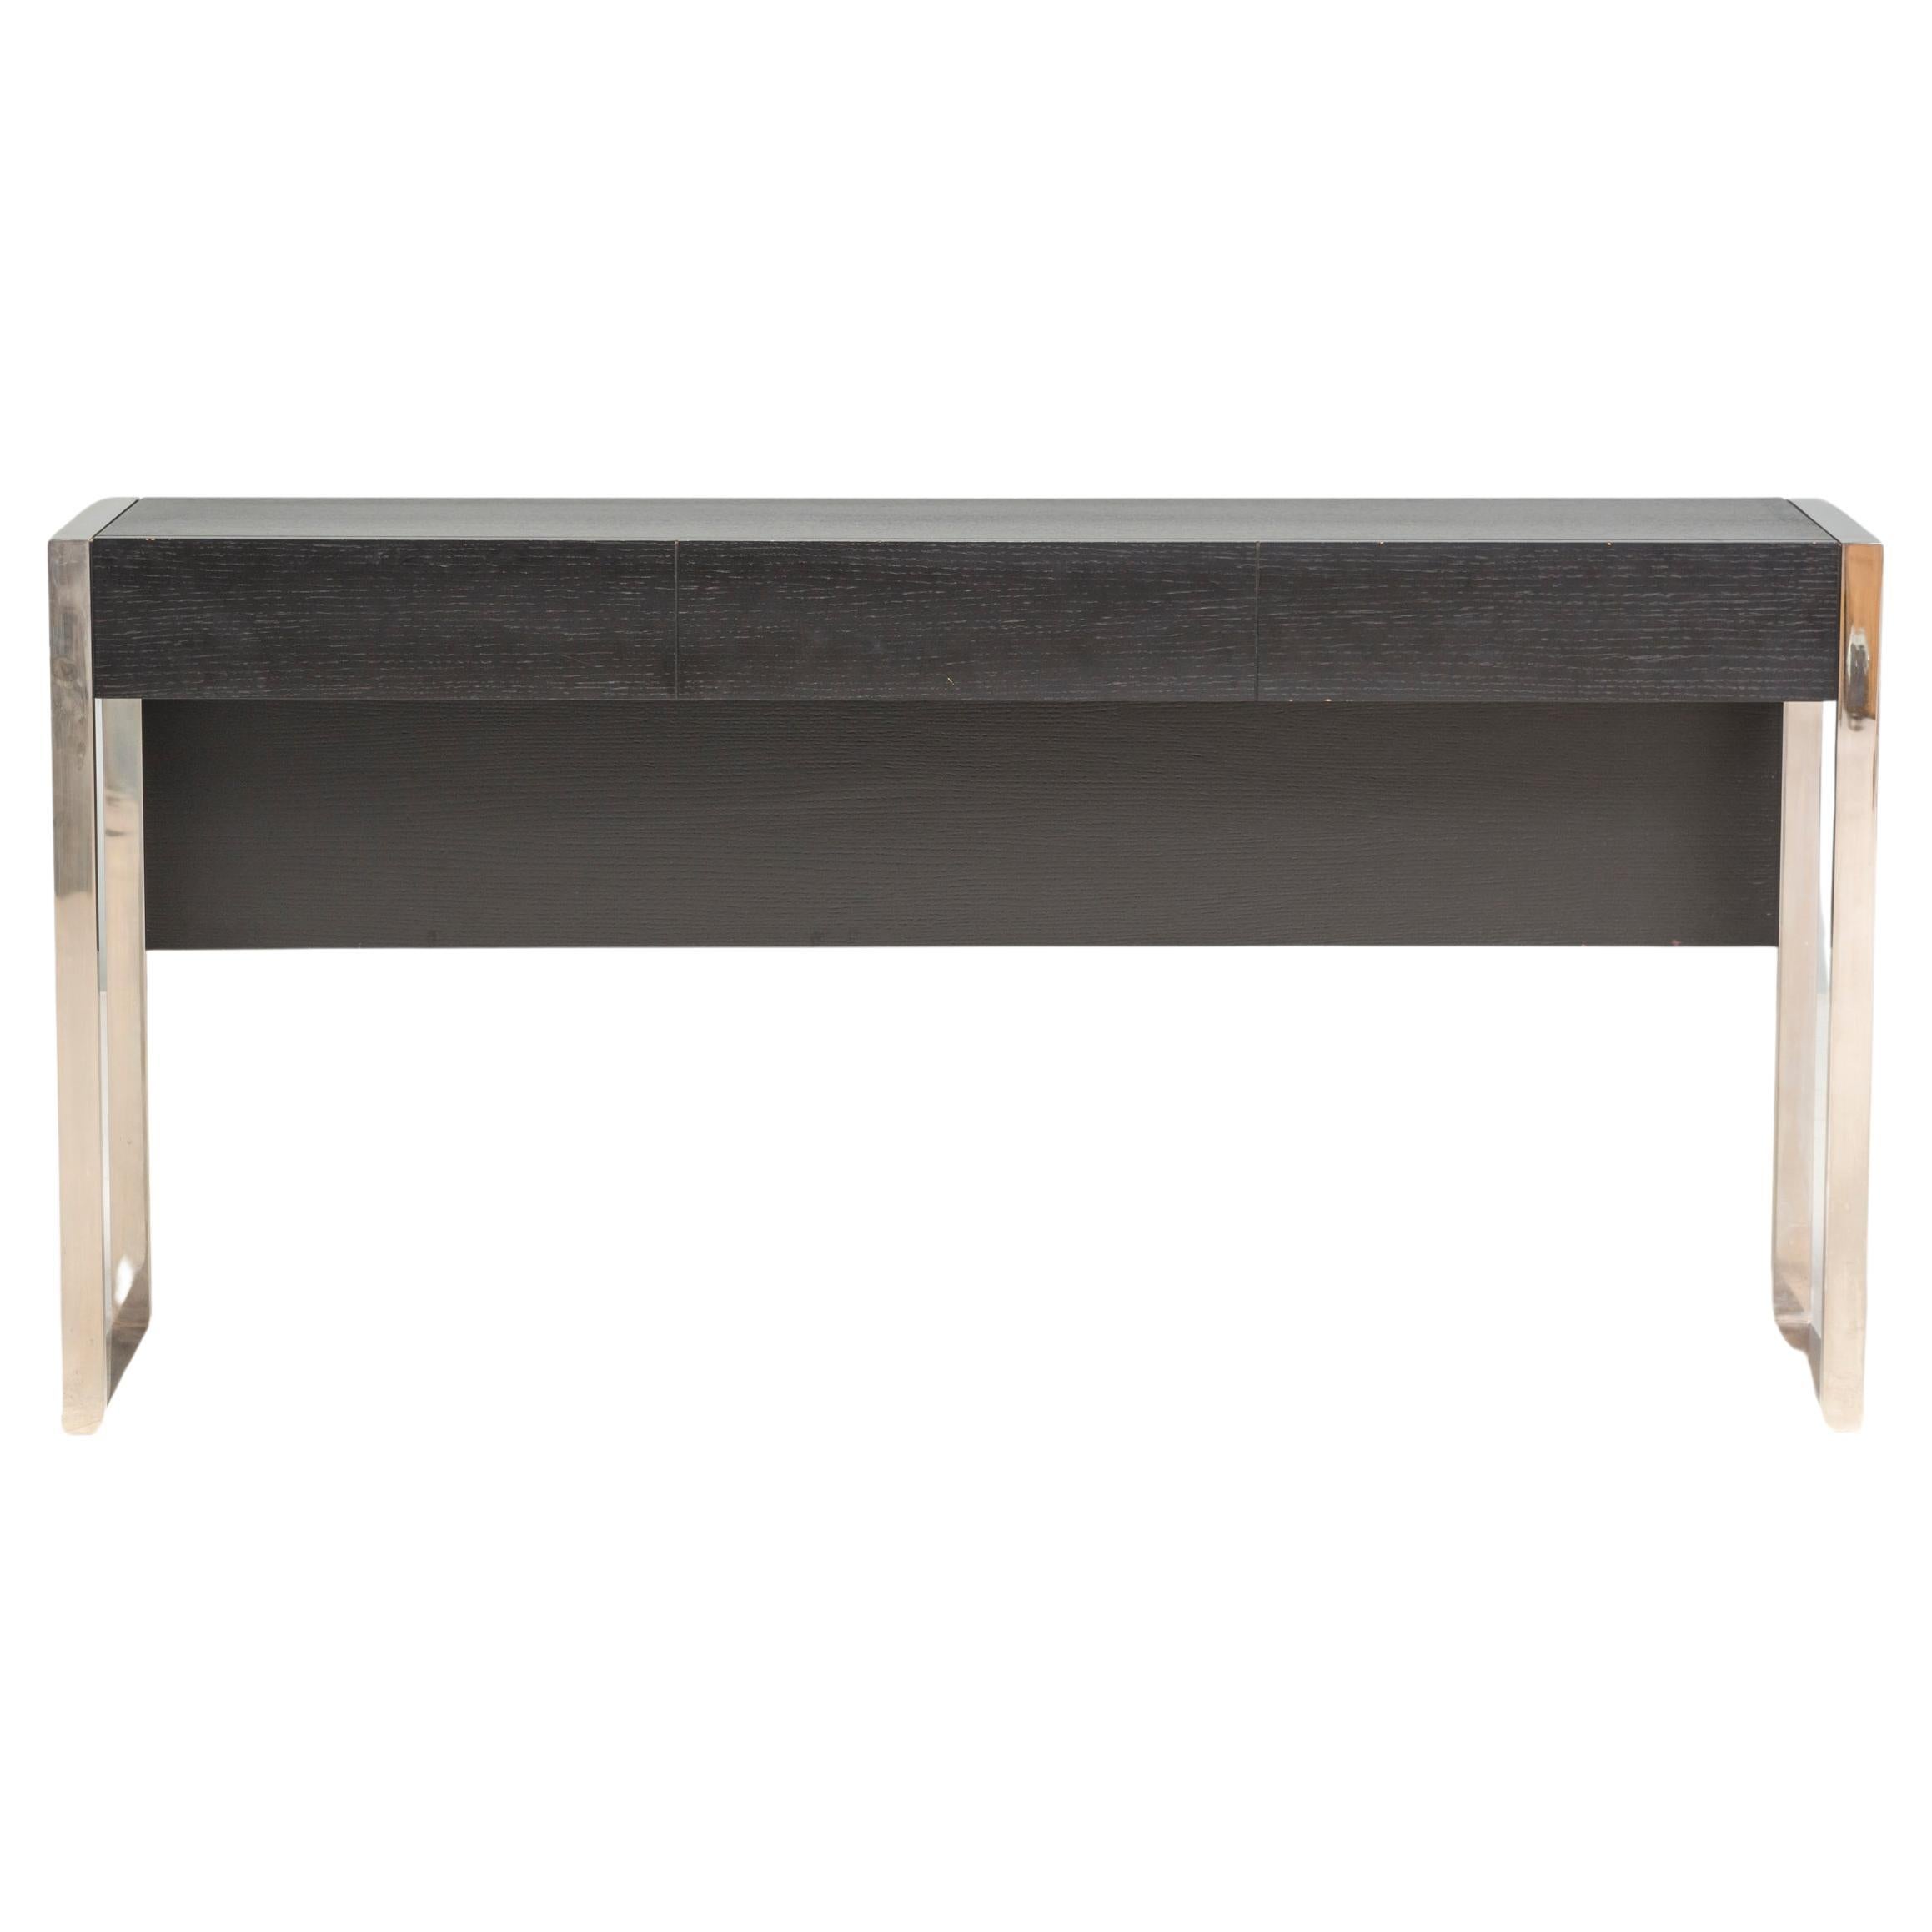 Bespoke Wood And Steel Console Table